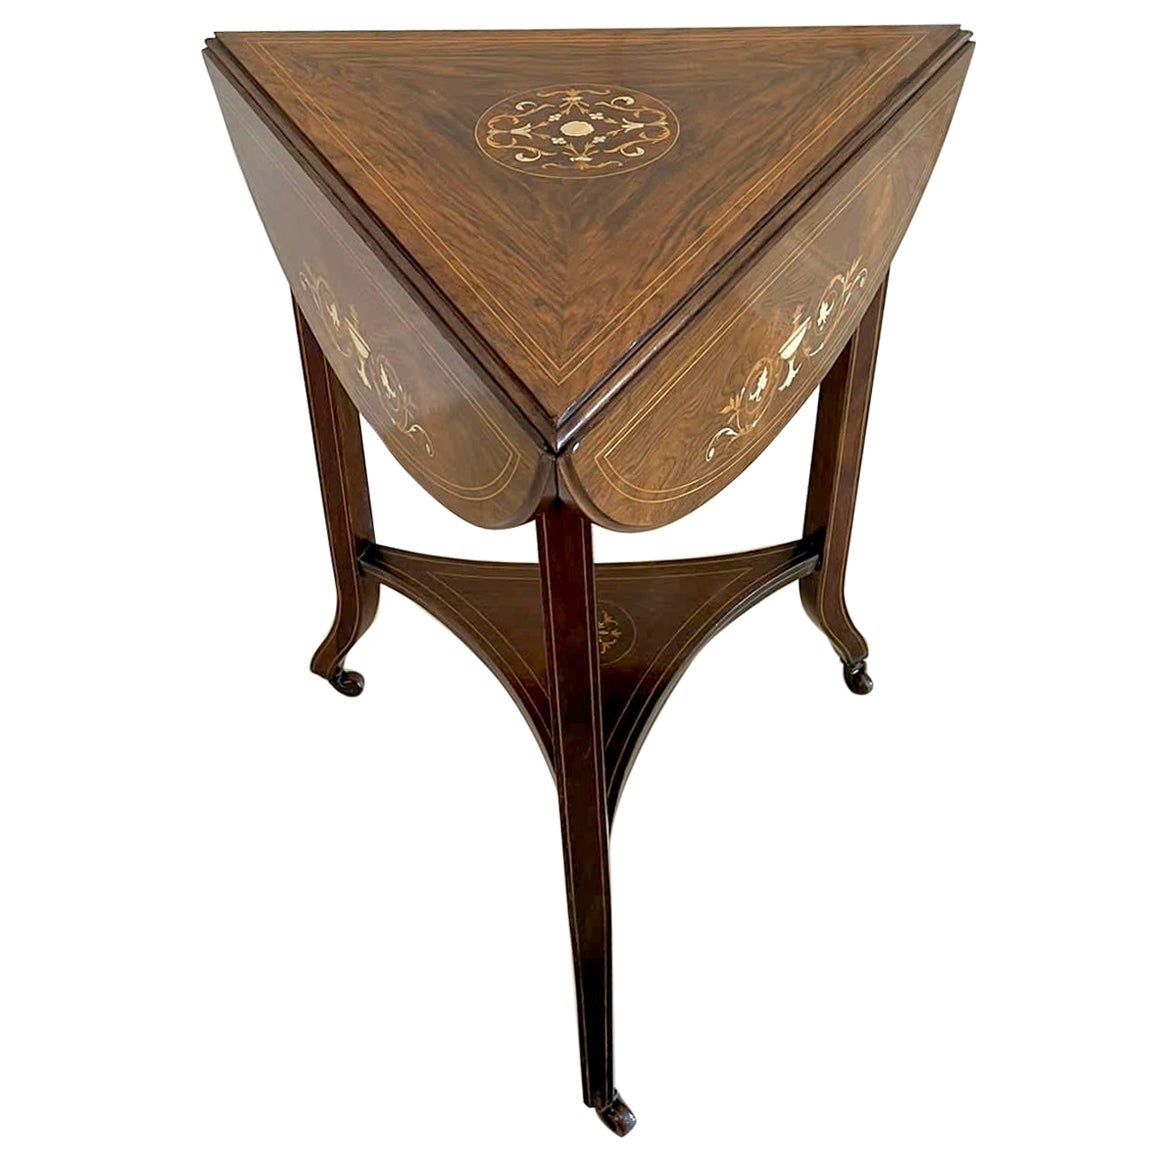 Unusual Antique Edwardian Quality Rosewood Inlaid Drop Leaf Centre Table For Sale